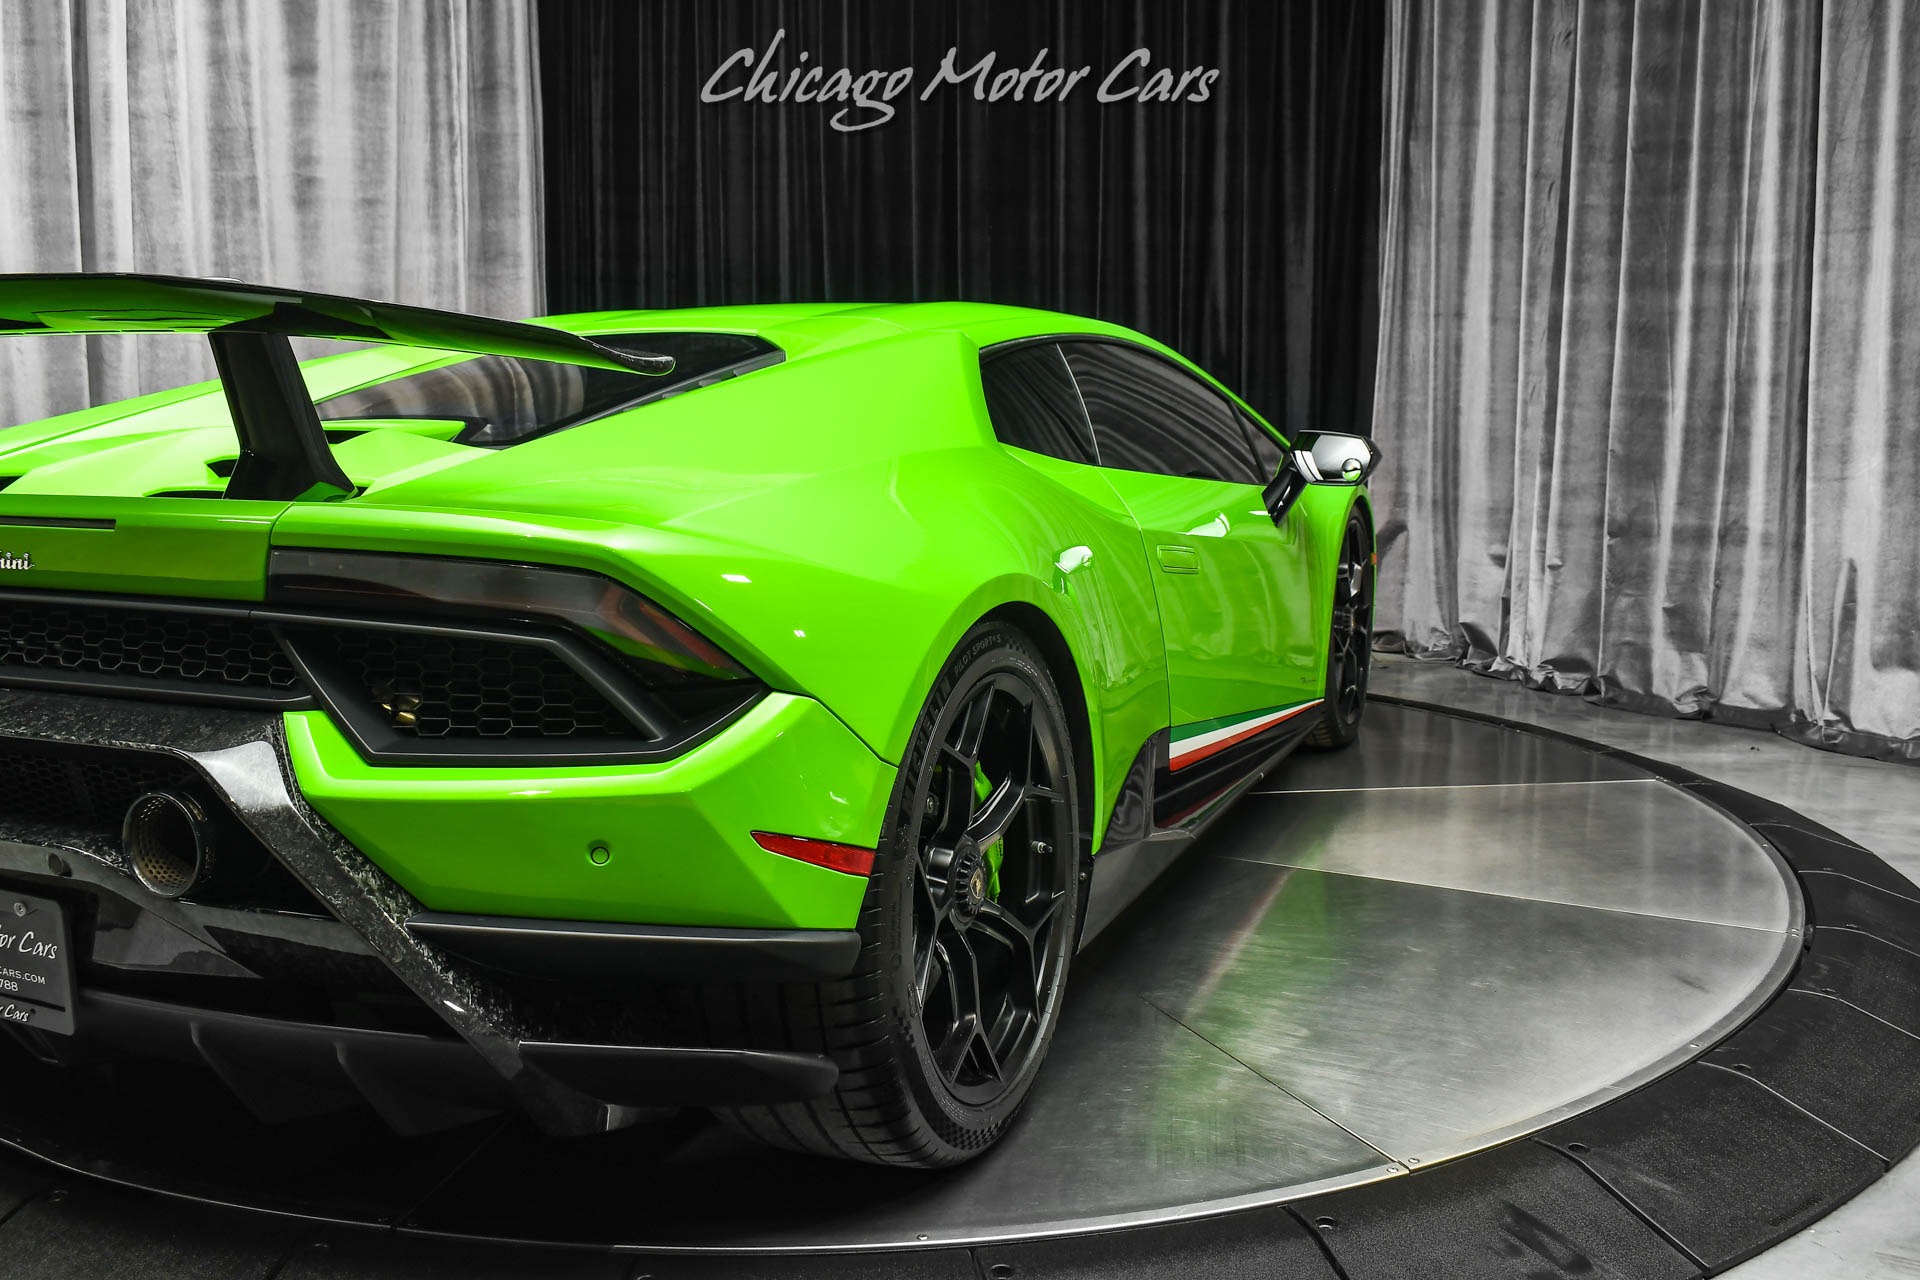 Used-2018-Lamborghini-Huracan-LP-640-4-Performante-VERDE-MANTIS-FINISH-FORGED-CARBON-ENGINE-BAY-LOADED